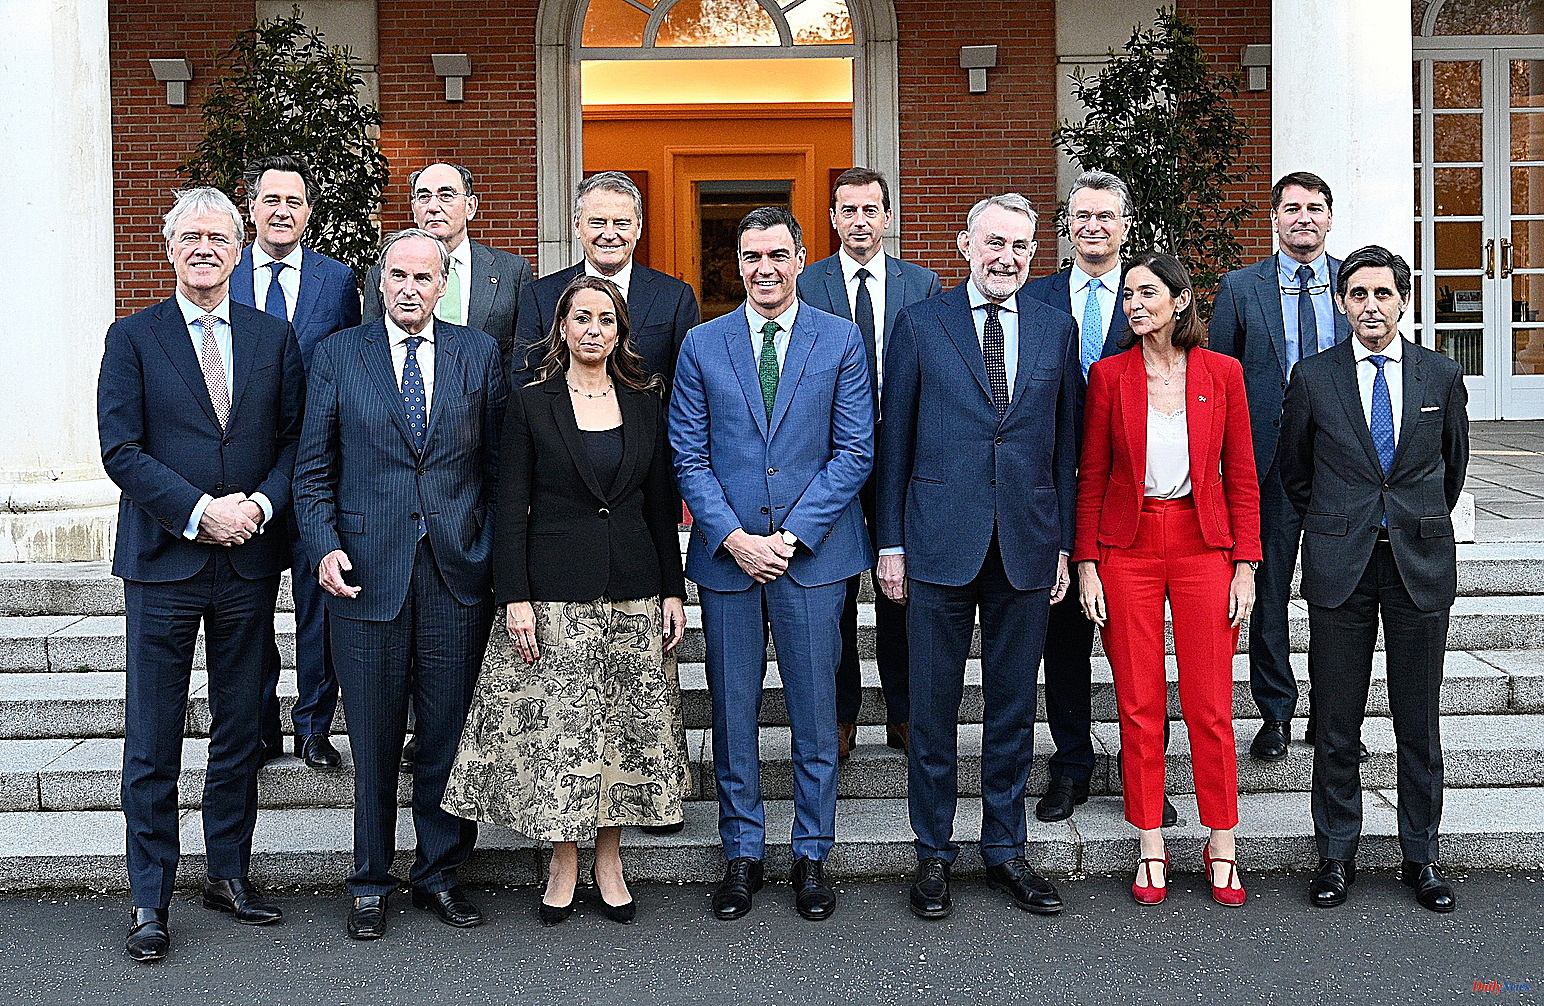 Economy The leaders of the European industry distinguish Feijóo and meet with him after seeing Sánchez